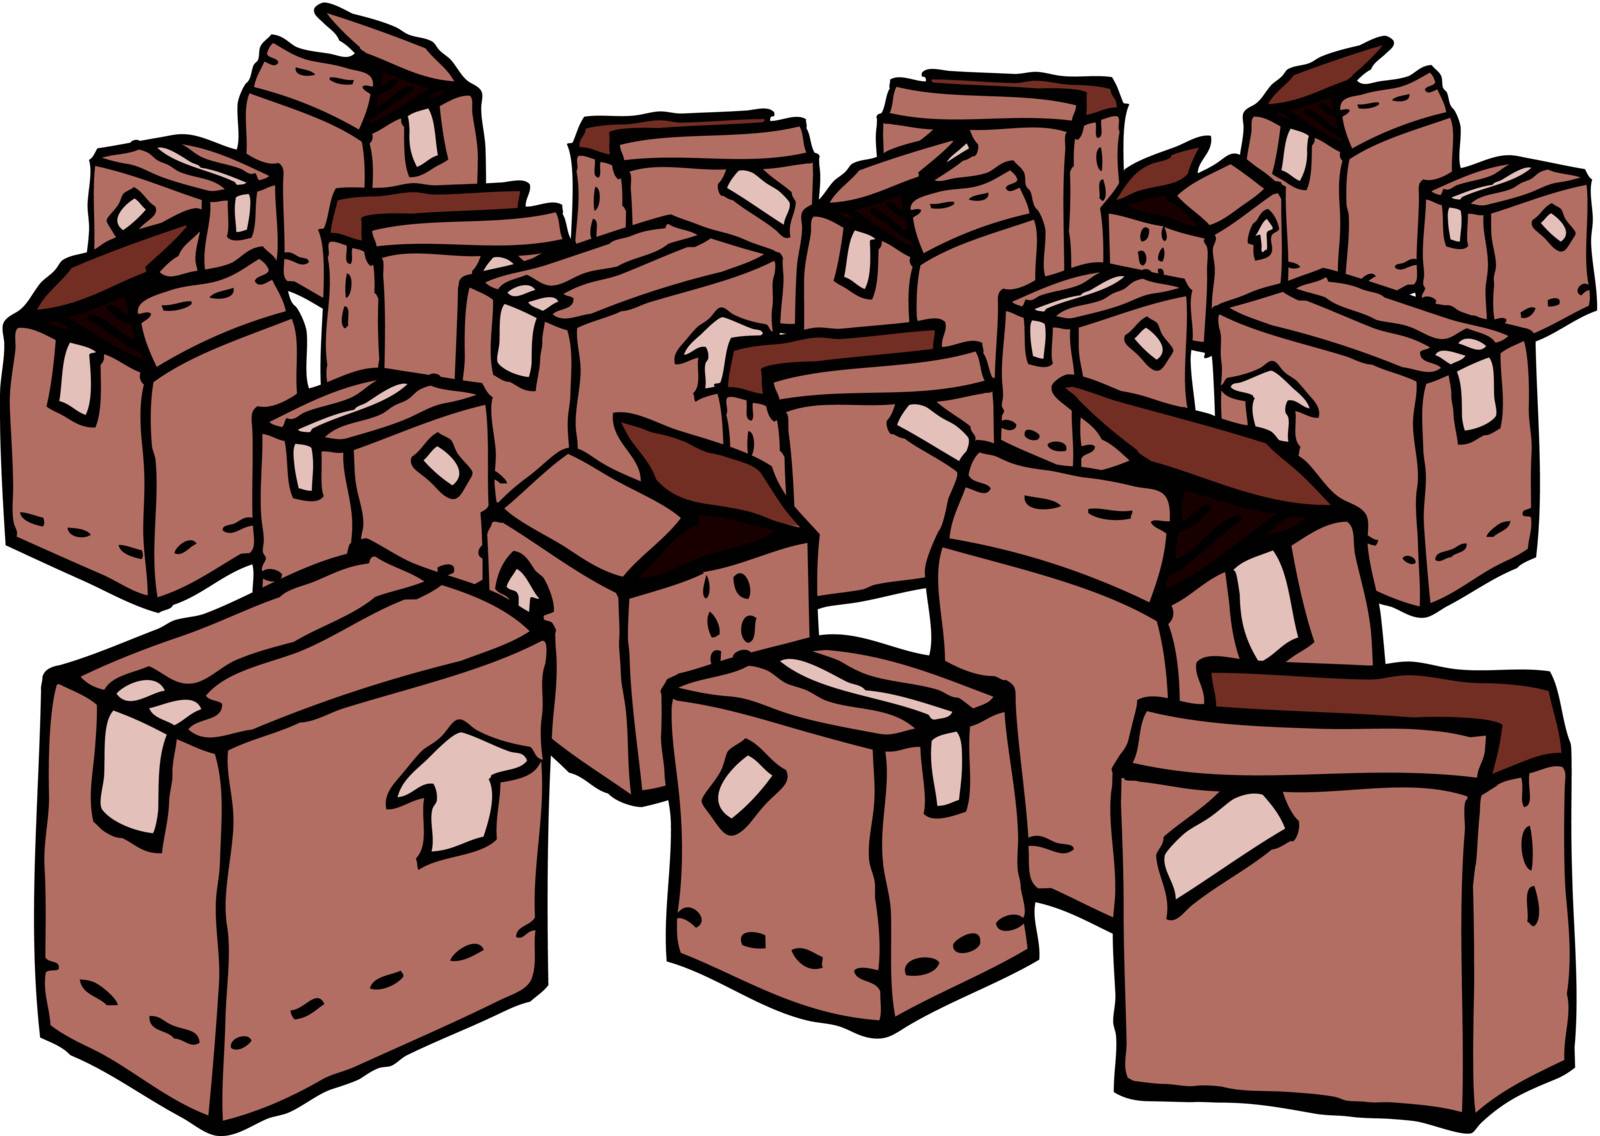 Lots of boxes / Messy stock by curvabezier